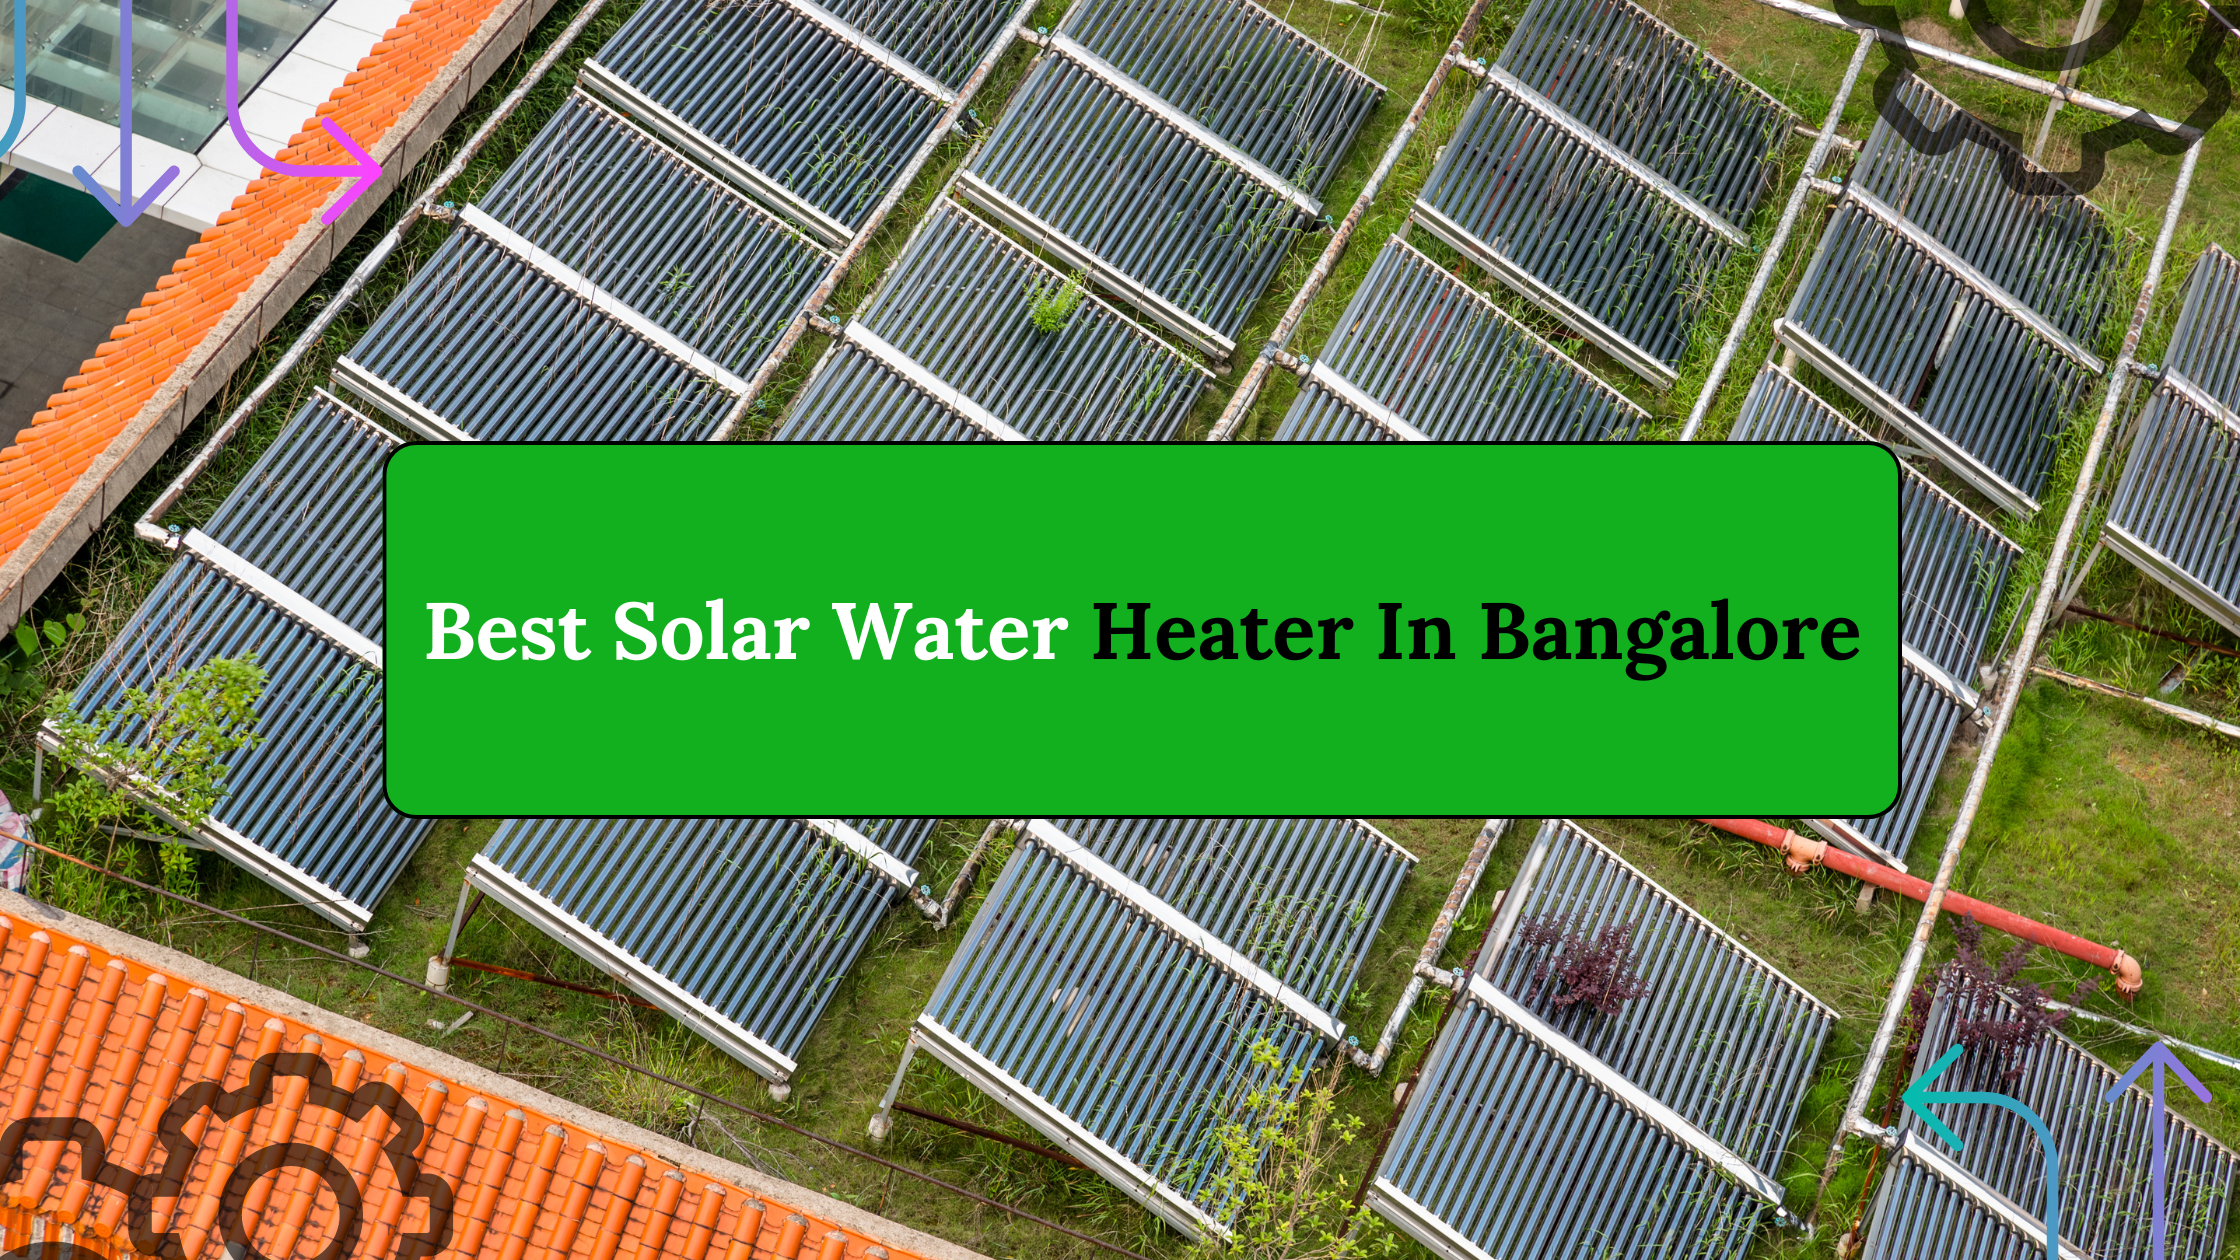 Guide to Finding the Best Solar Water Heater in Bangalore
